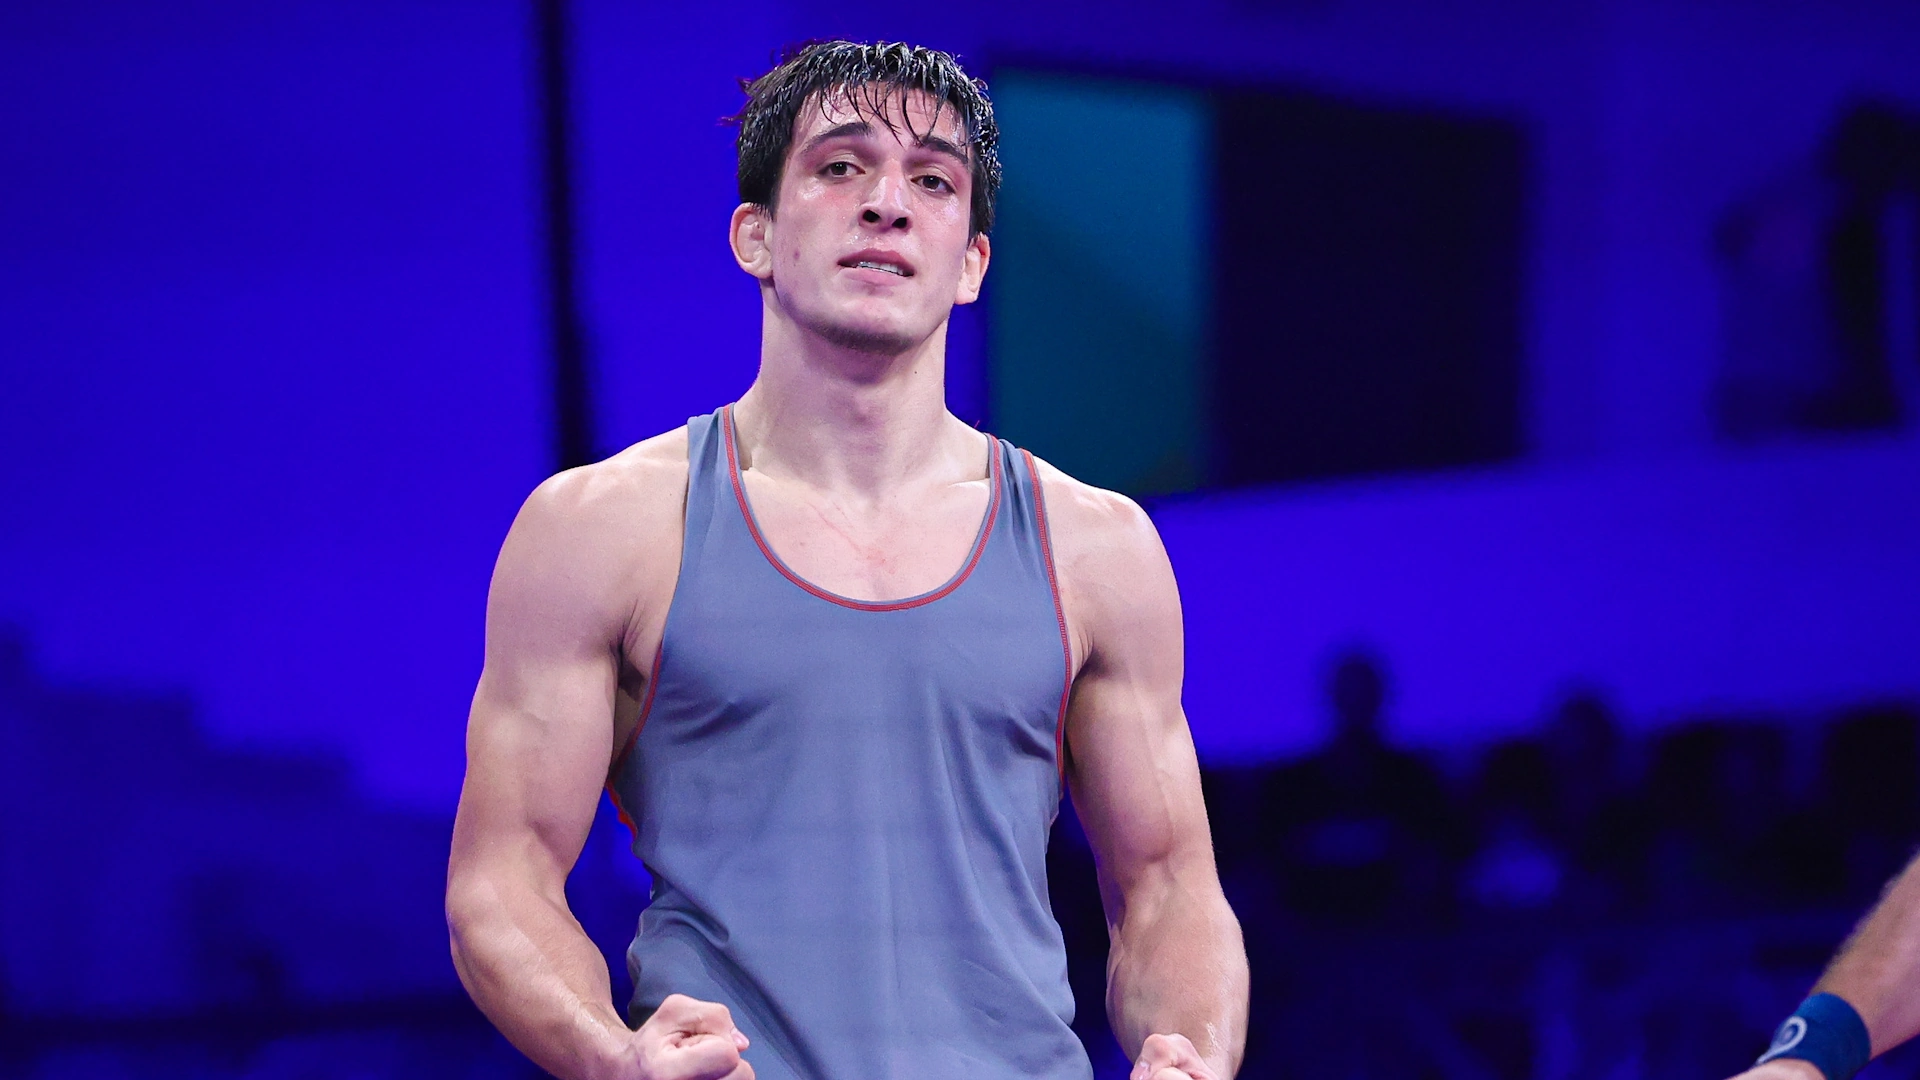 20-year-old Ibragim Kadiev in the final of the Russian wrestling championship